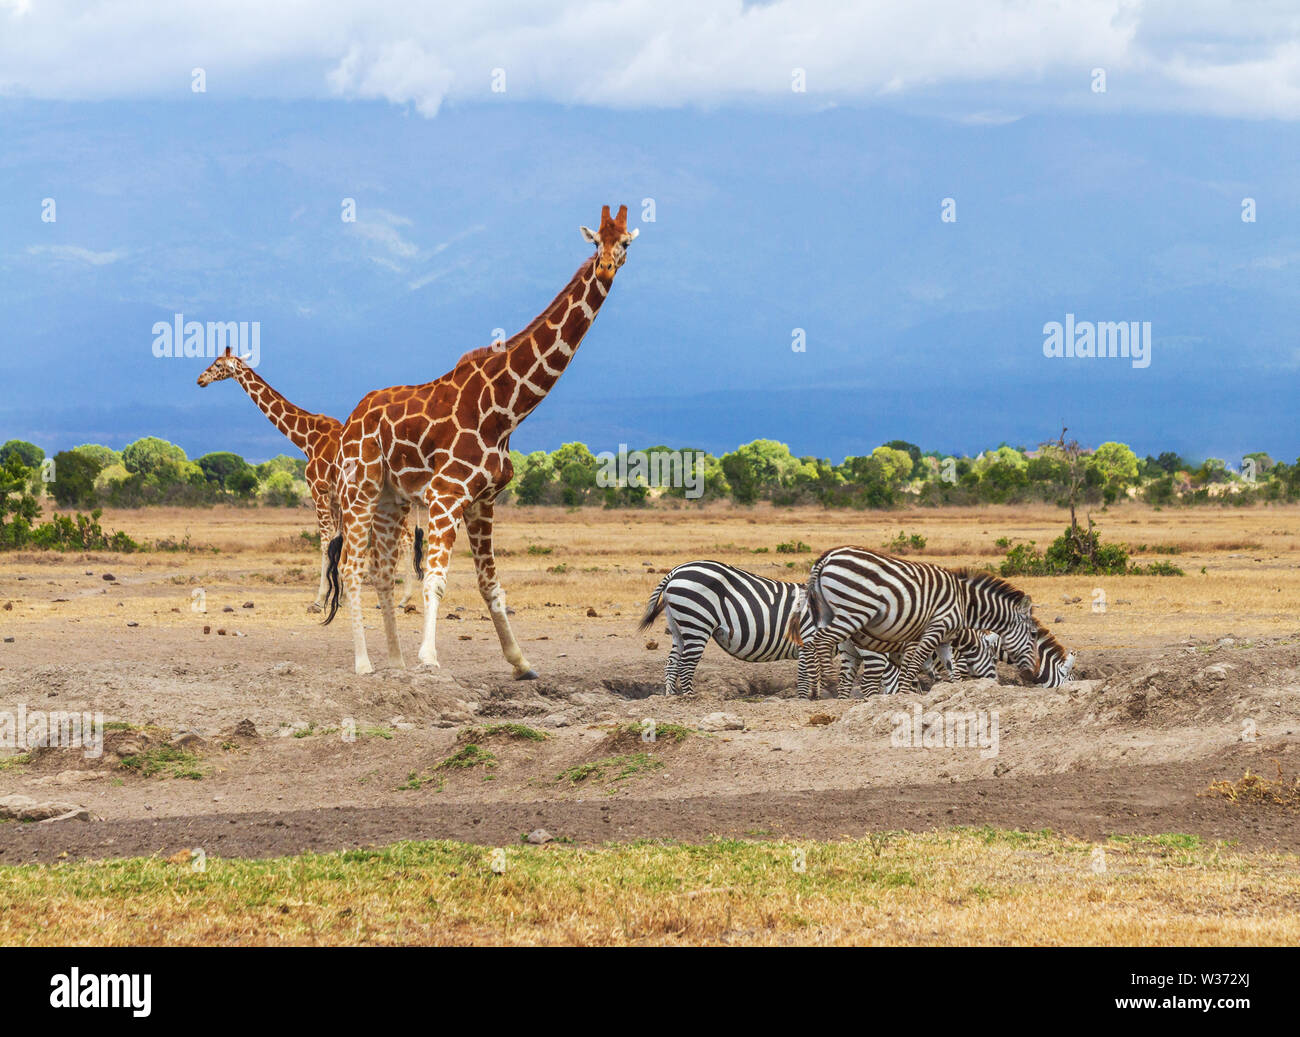 Two reticulated giraffes behind group of zebras who are drinking water. Giraffa camelopardalis reticulata. Ol Pejeta Conservancy, Kenya, Africa Stock Photo